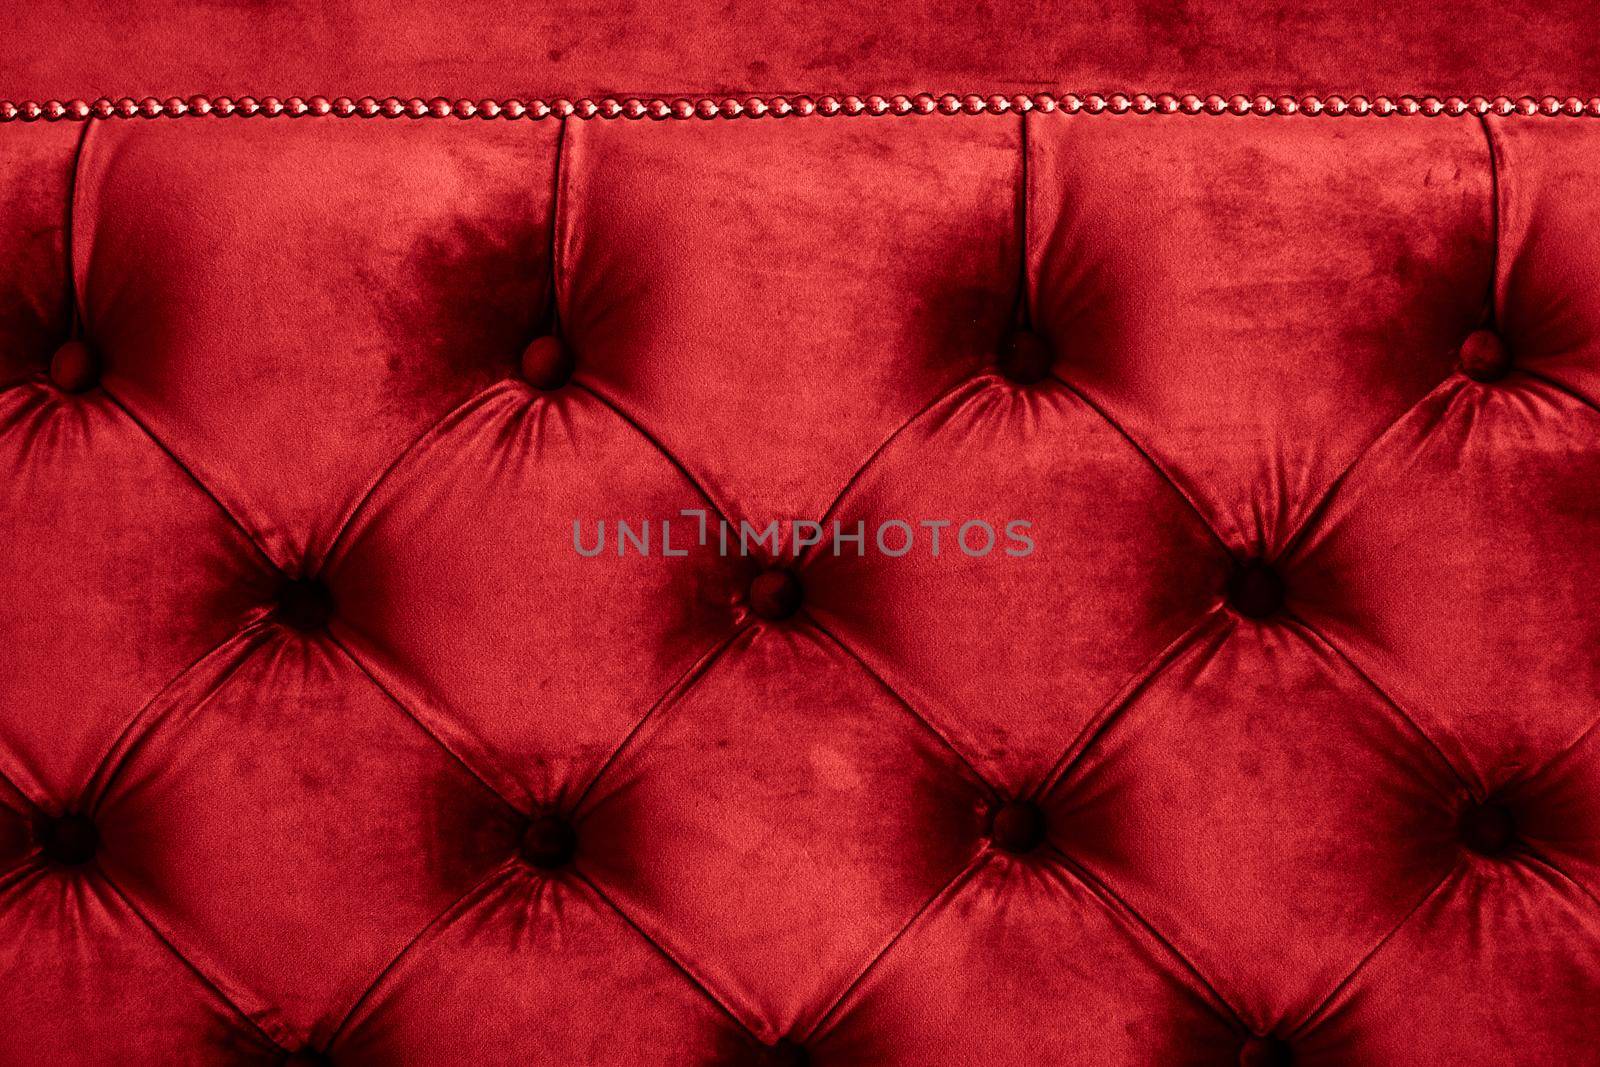 Furniture design, classic interior and royal vintage material concept - Red luxury velour quilted sofa upholstery with buttons, elegant home decor texture and background